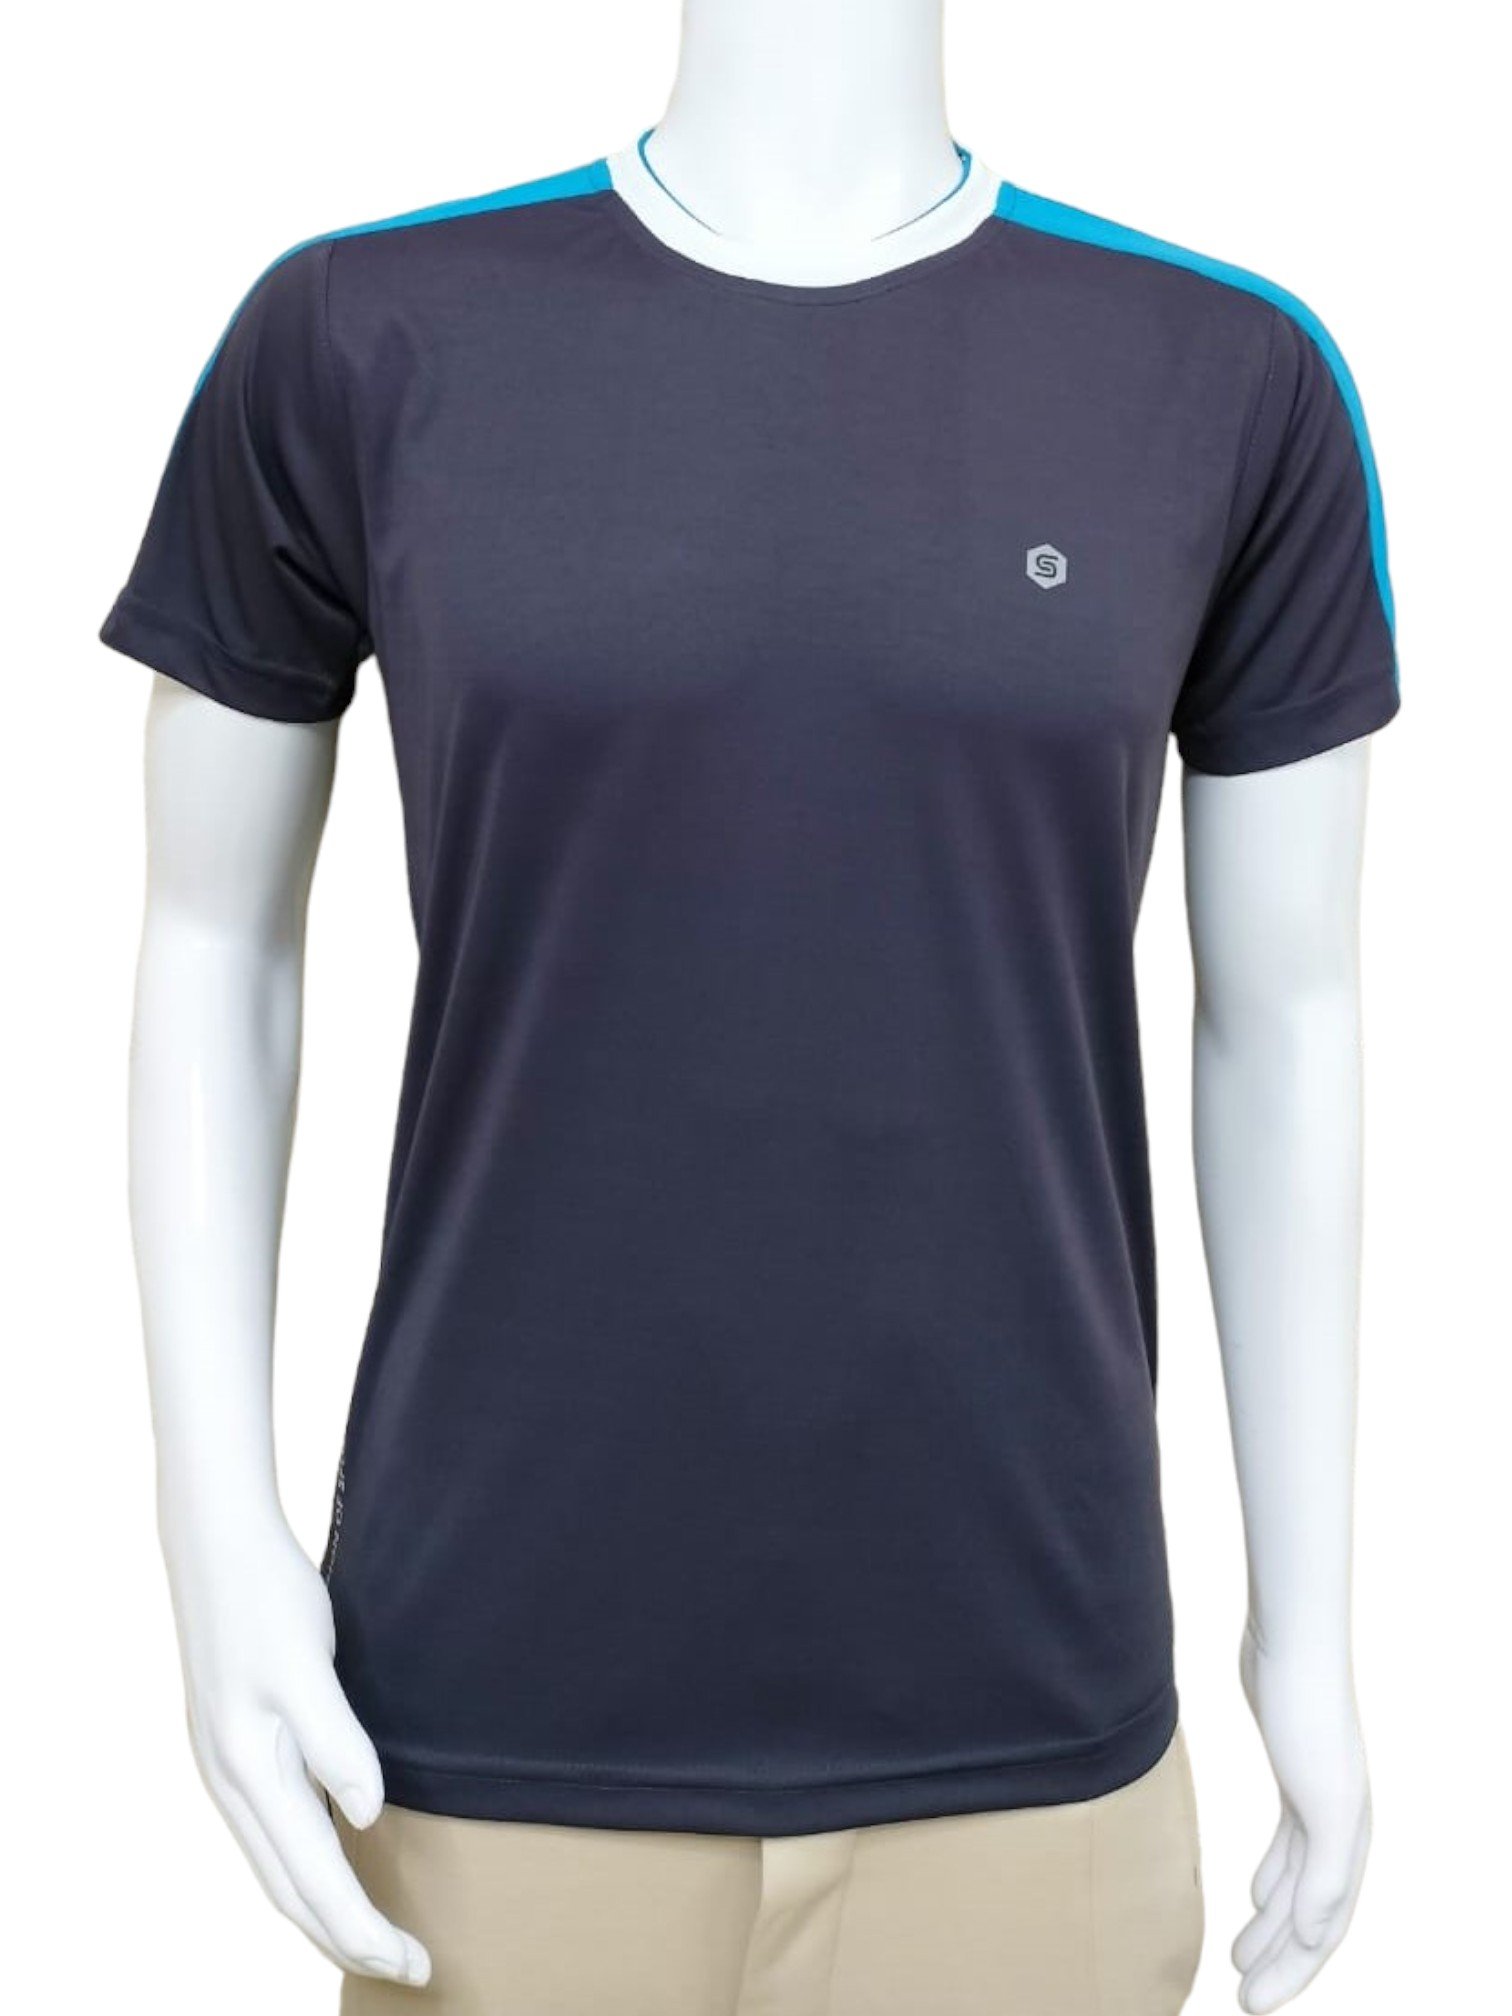 Sportism Half Sleeves T-Shirt in Mauve